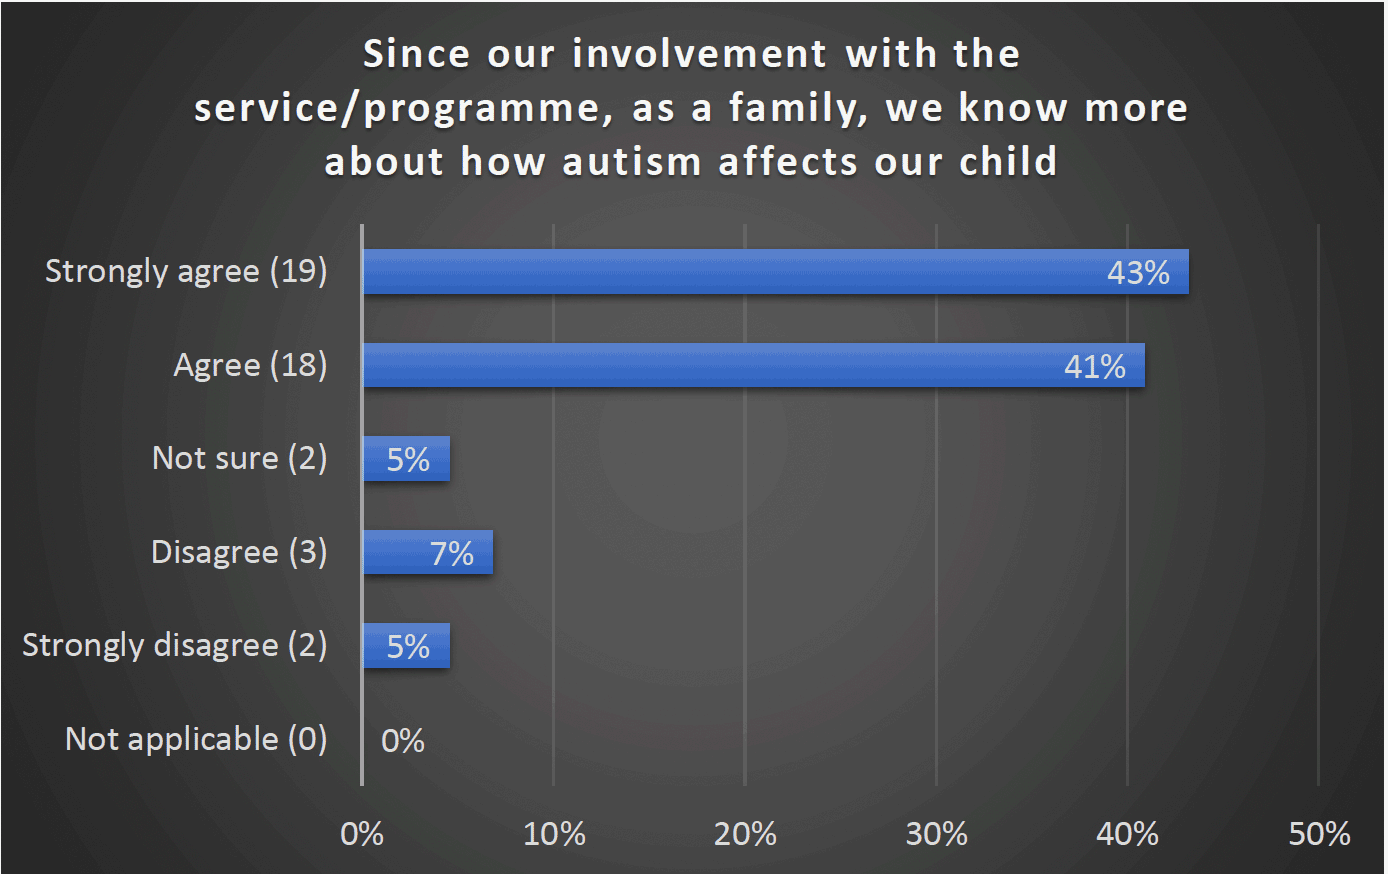 Since our involvement with the service/programme, as a family, we know more about how autism affects our child - Strongly agree (19) 43%, Agree (18) 41%, Not sure (2) 5%, Disagree (3) 7%, Strongly disagree (2) 5%